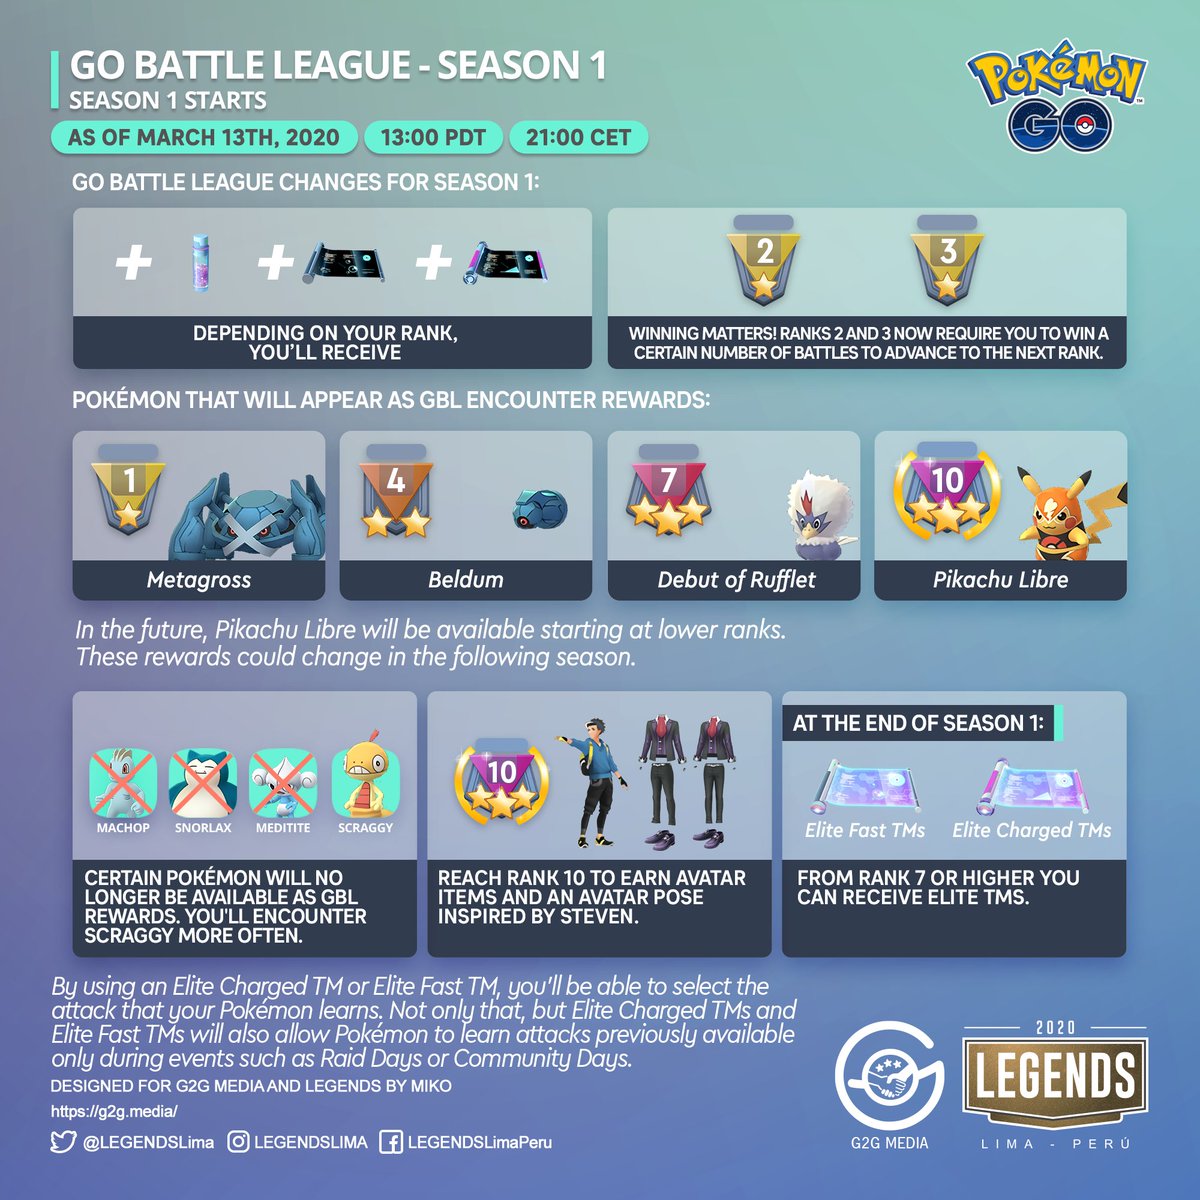 Legends On Twitter Gobattleleague Season 1 Es Finally Here Learn All About It Also Until Further Notice You Won T Have To Walk 1 Km For Gbl Battles And Now You Can